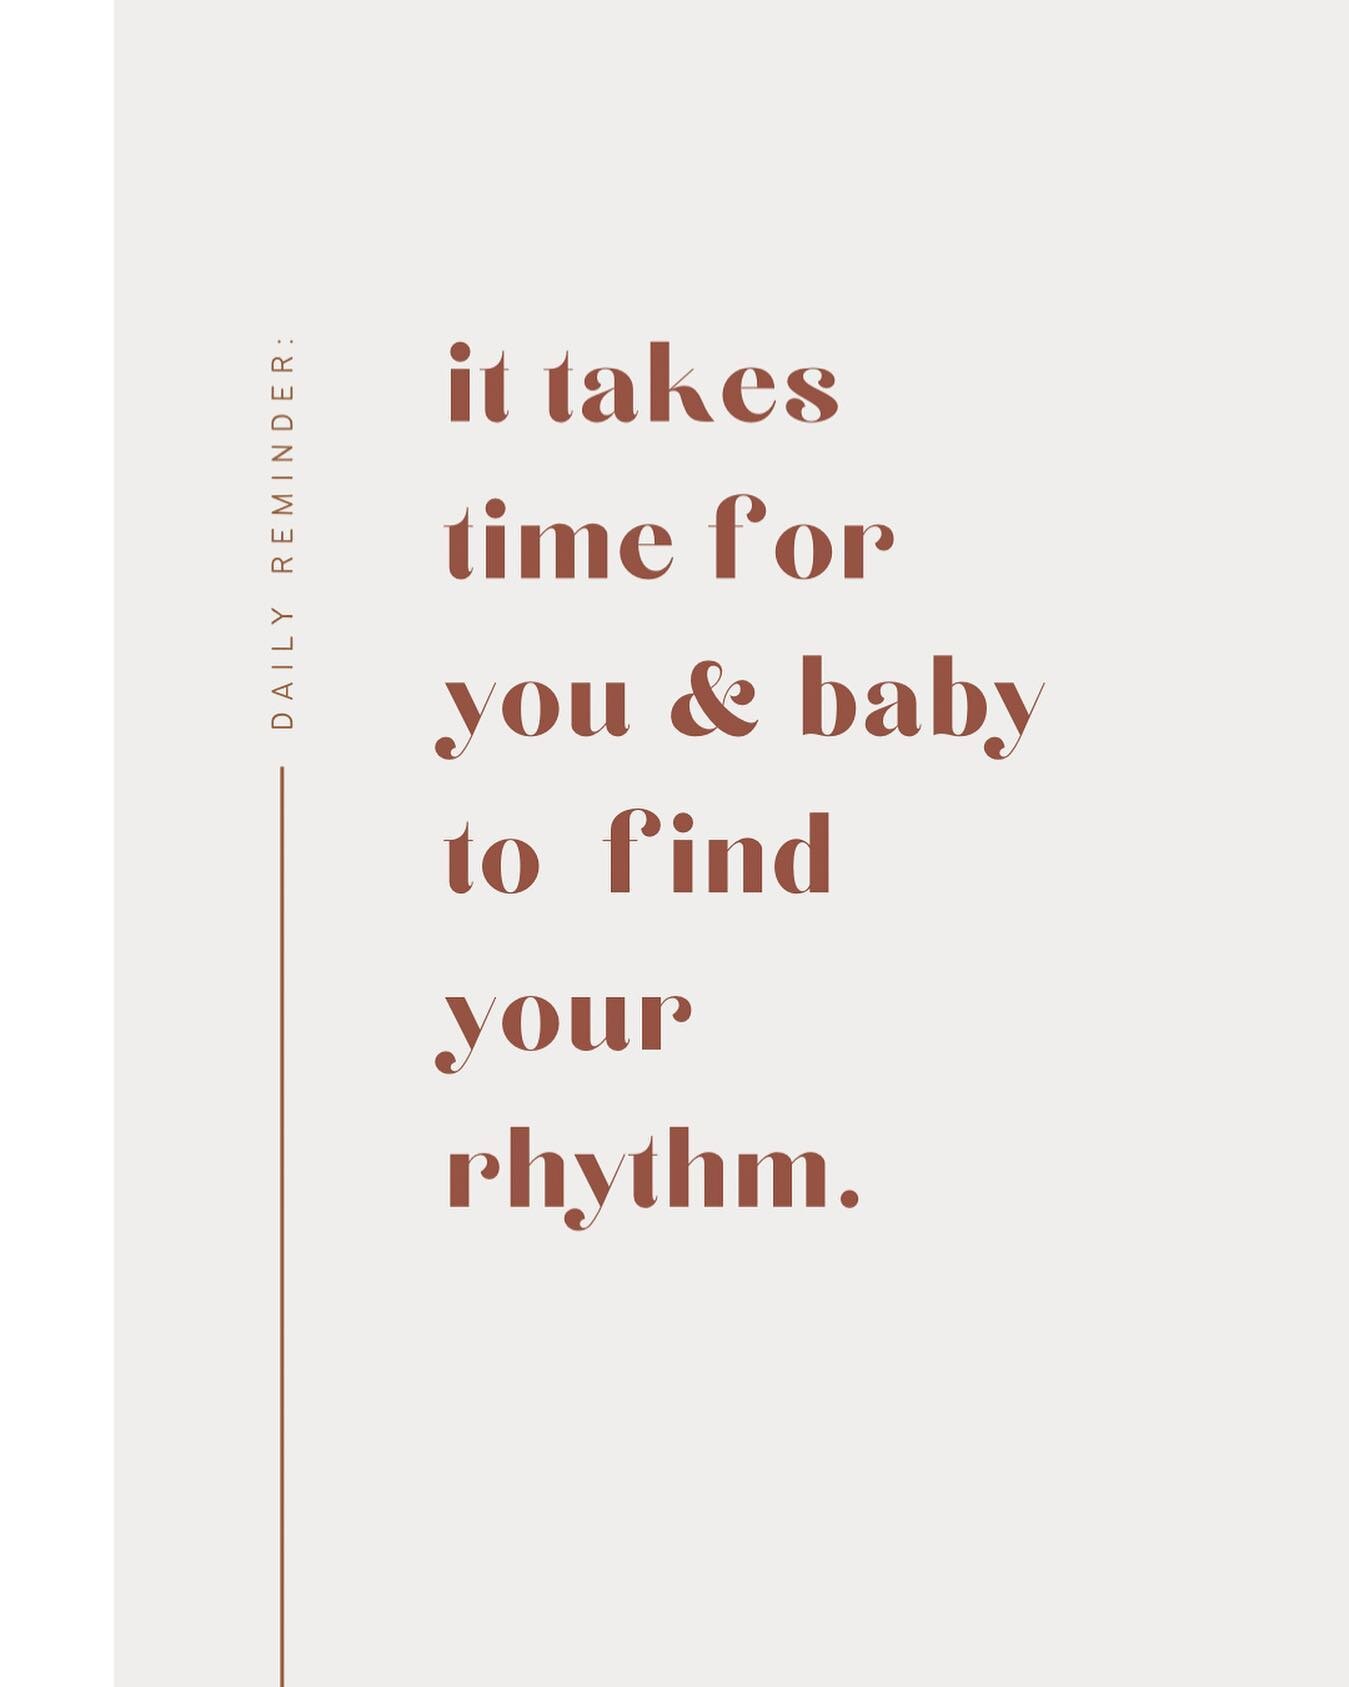 It takes time for you and your baby to learn together and find your rhythm. Whether it be finding your rhythm in breastfeeding, sleep or daily life &mdash; show yourself grace, try not to rush yourself and enjoy the little moments. The postpartum per